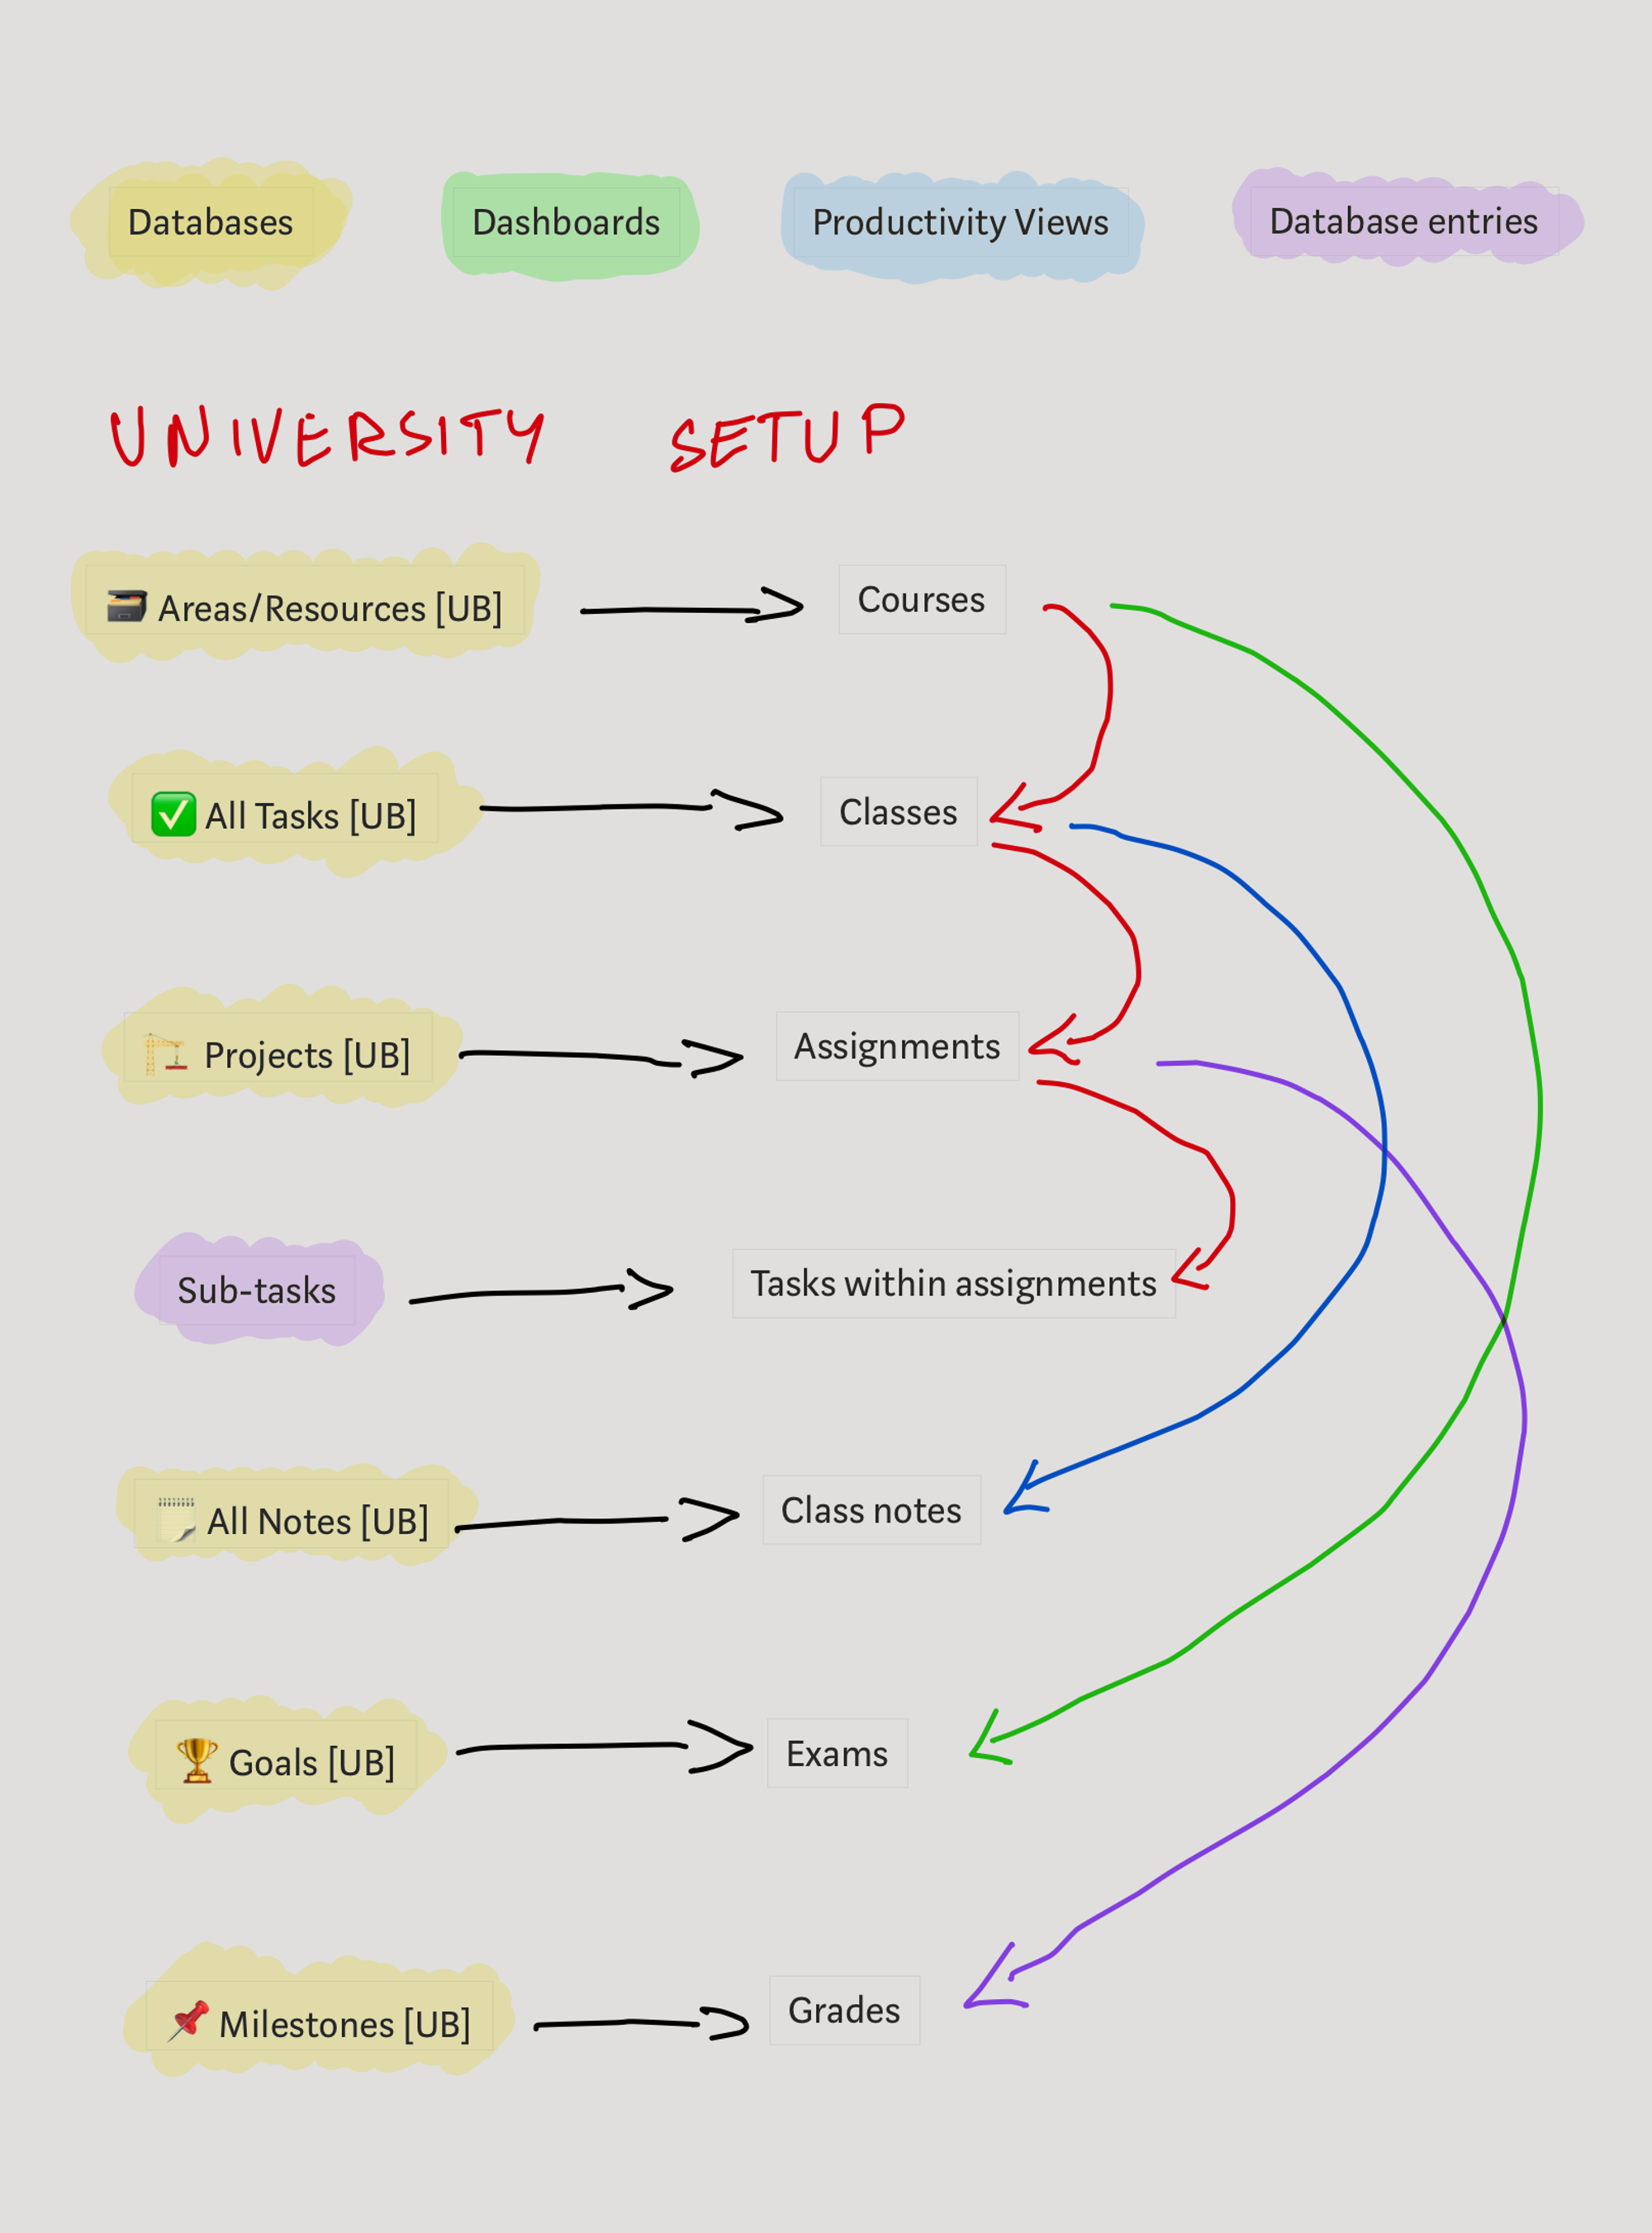 Our data model for a university setup. Click to enlarge.